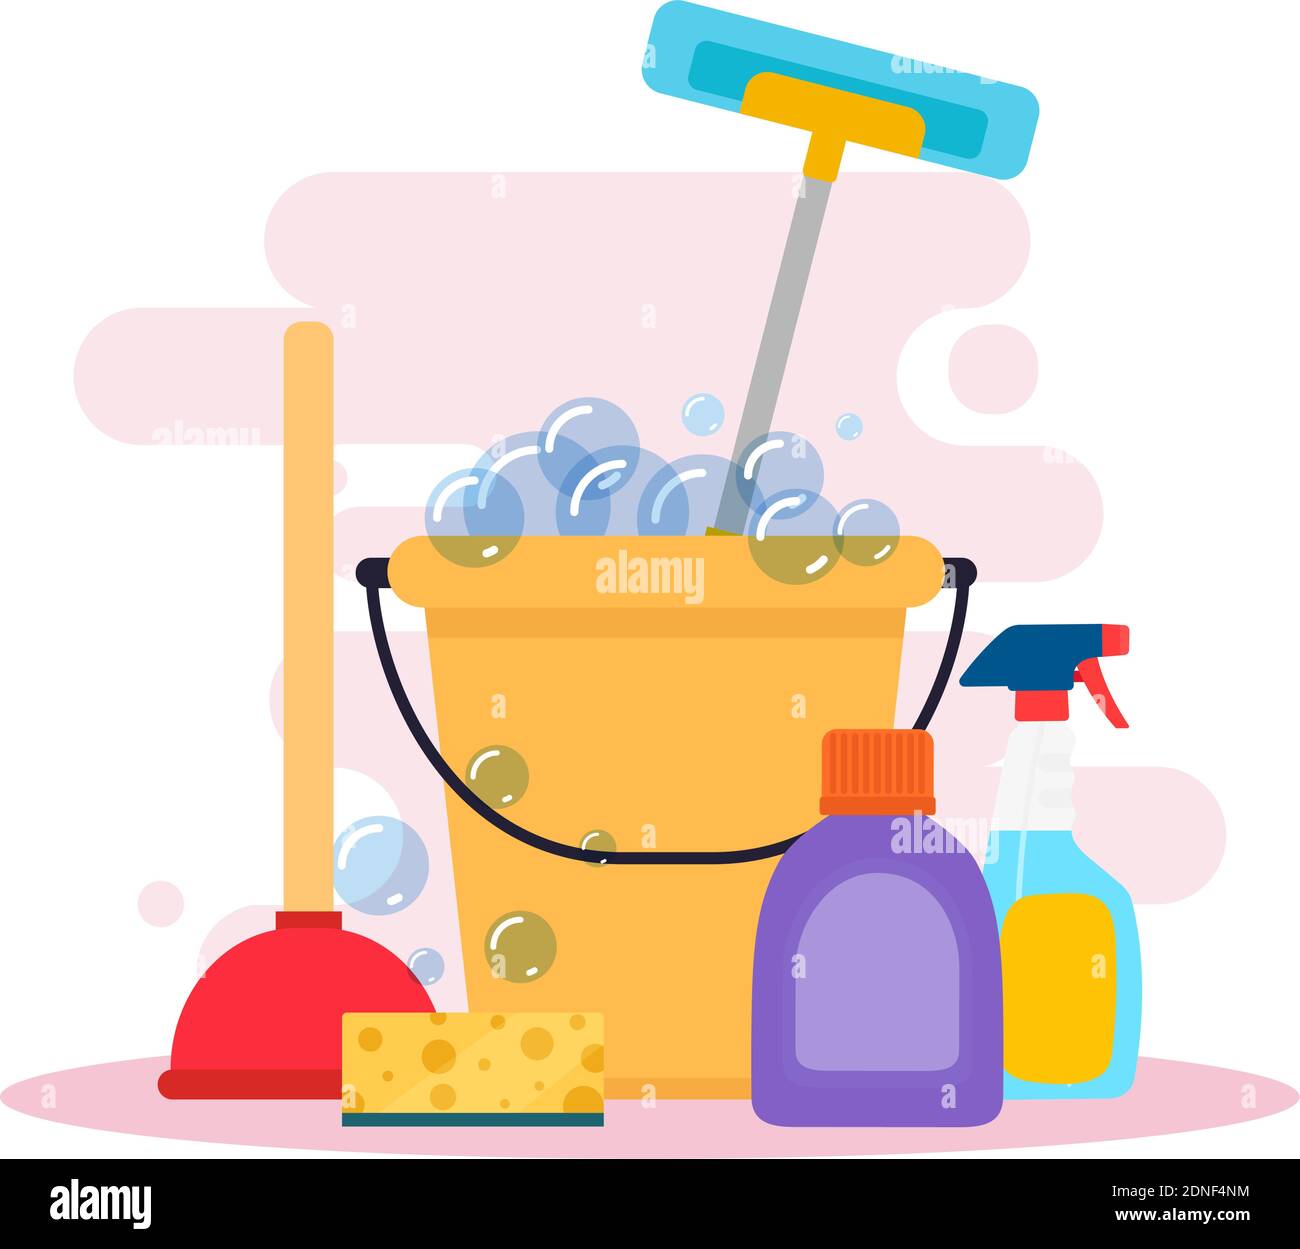 https://c8.alamy.com/comp/2DNF4NM/cleaning-products-image-in-white-blackboard-vector-2DNF4NM.jpg